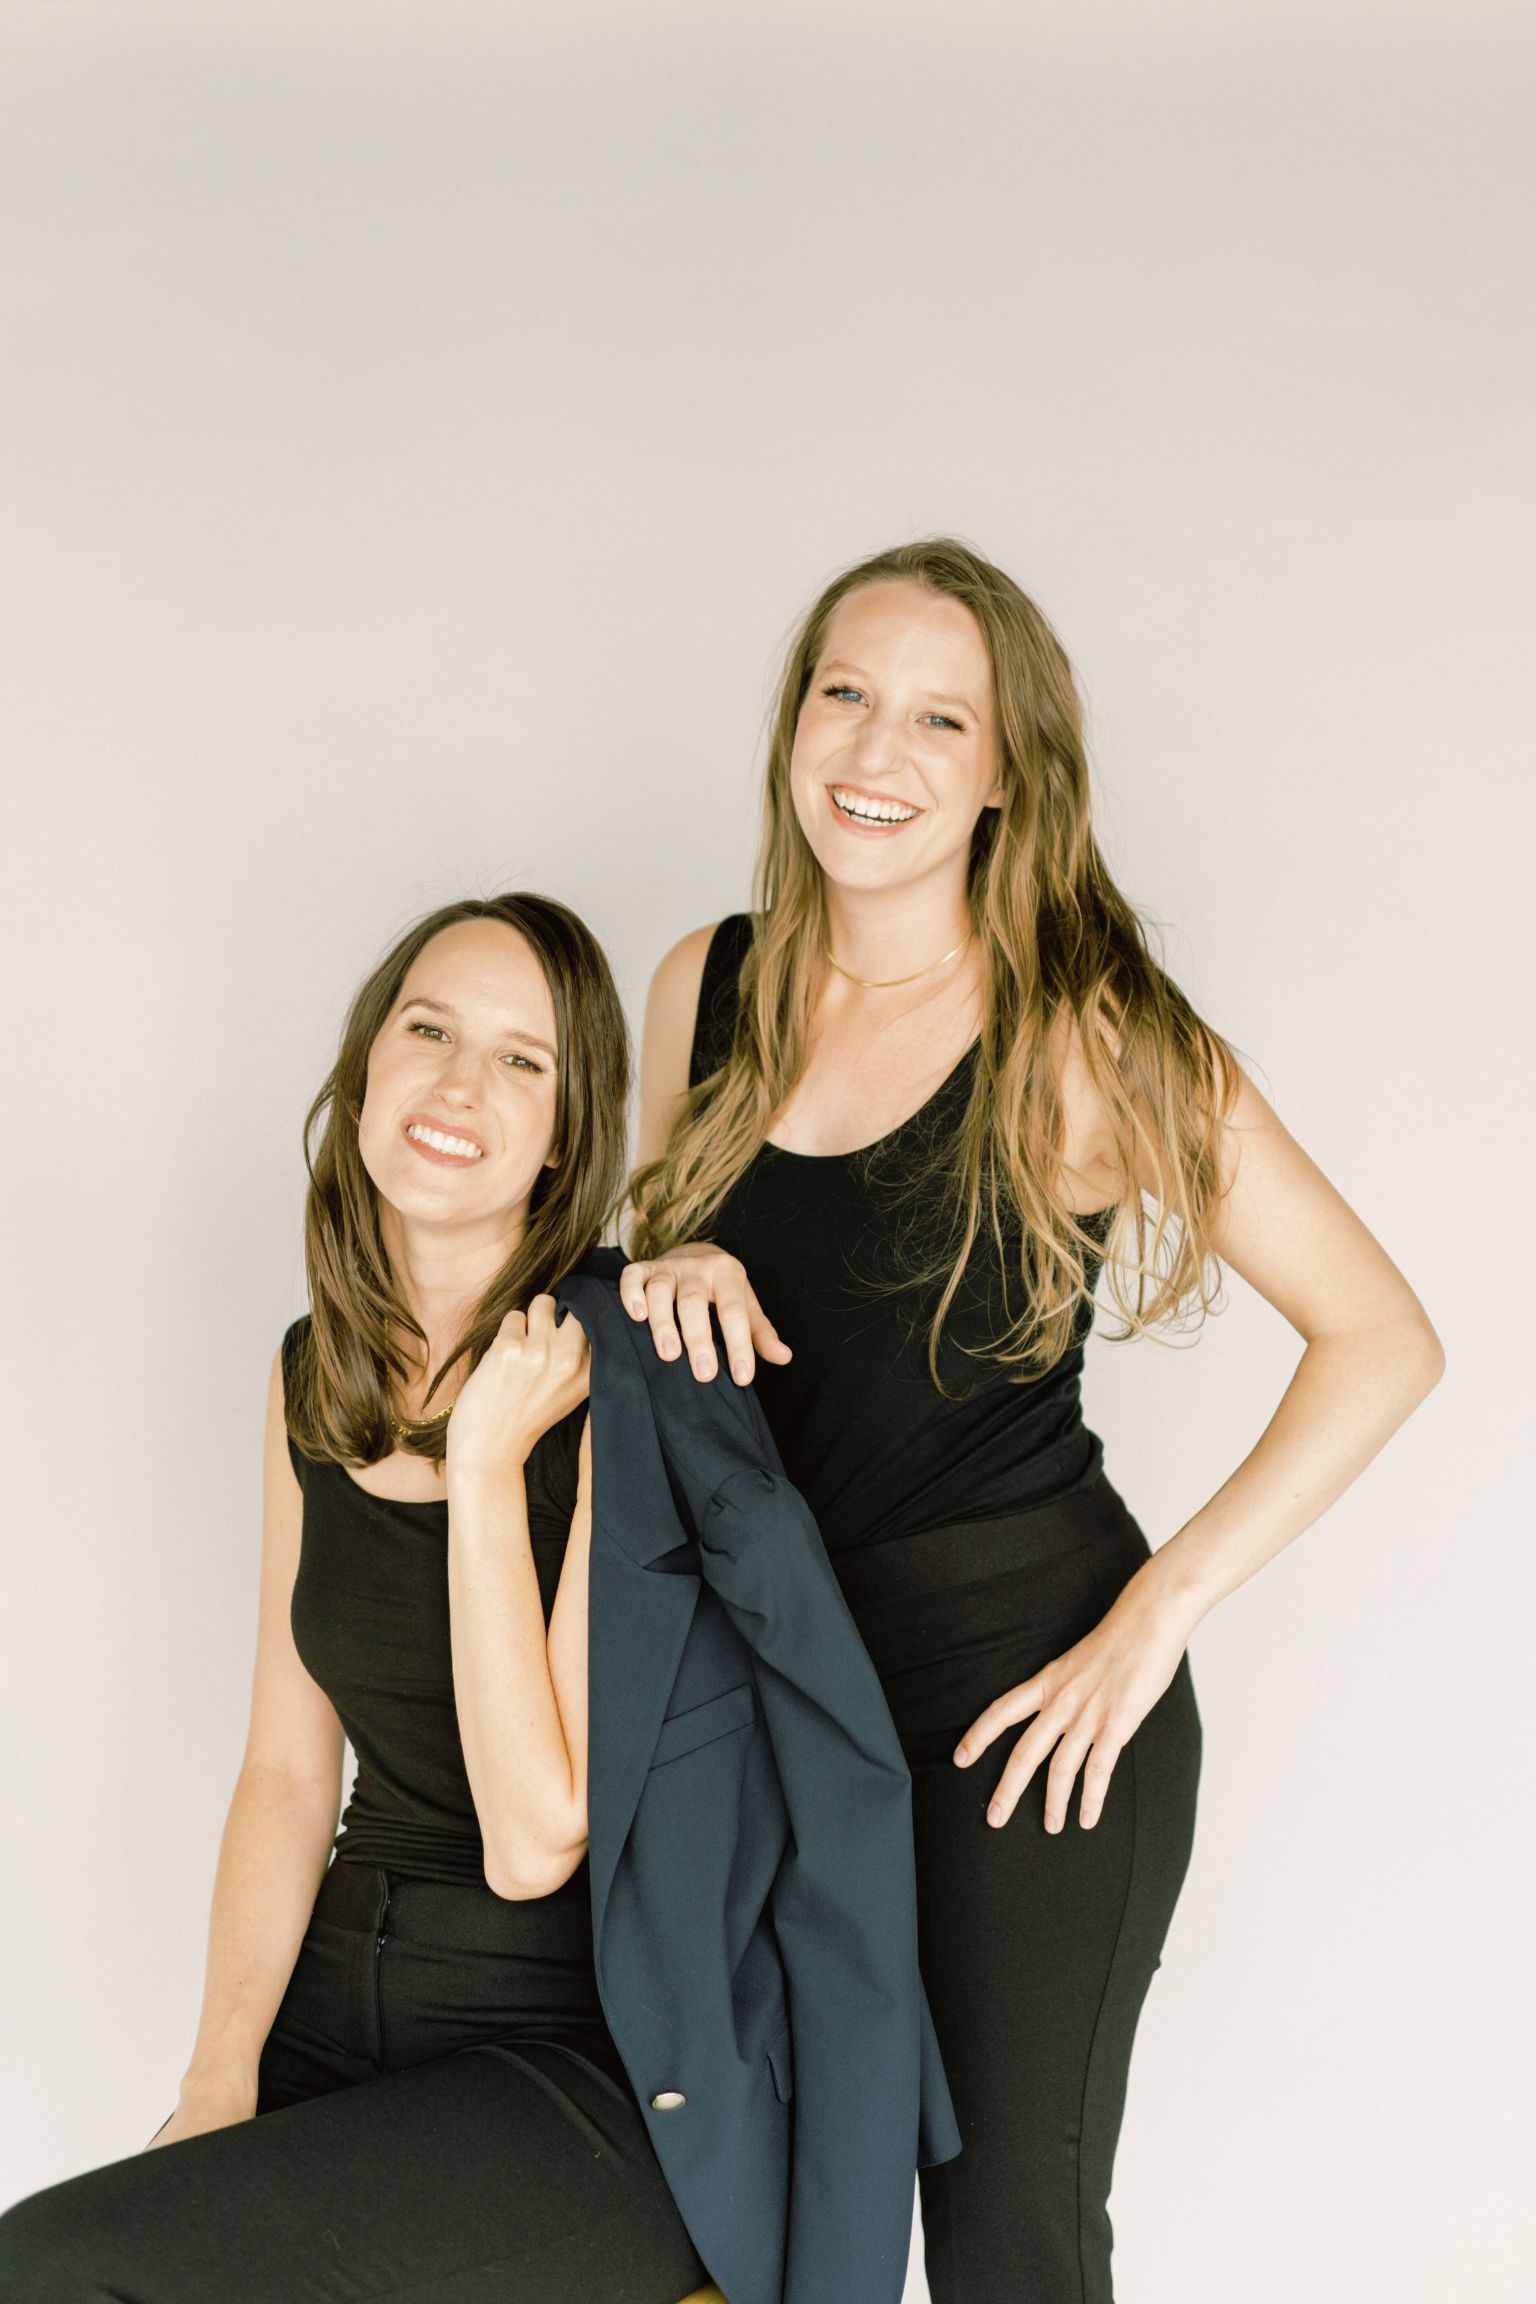 Sara and Stacy Prech, co-founders and coaches of Well and Whole